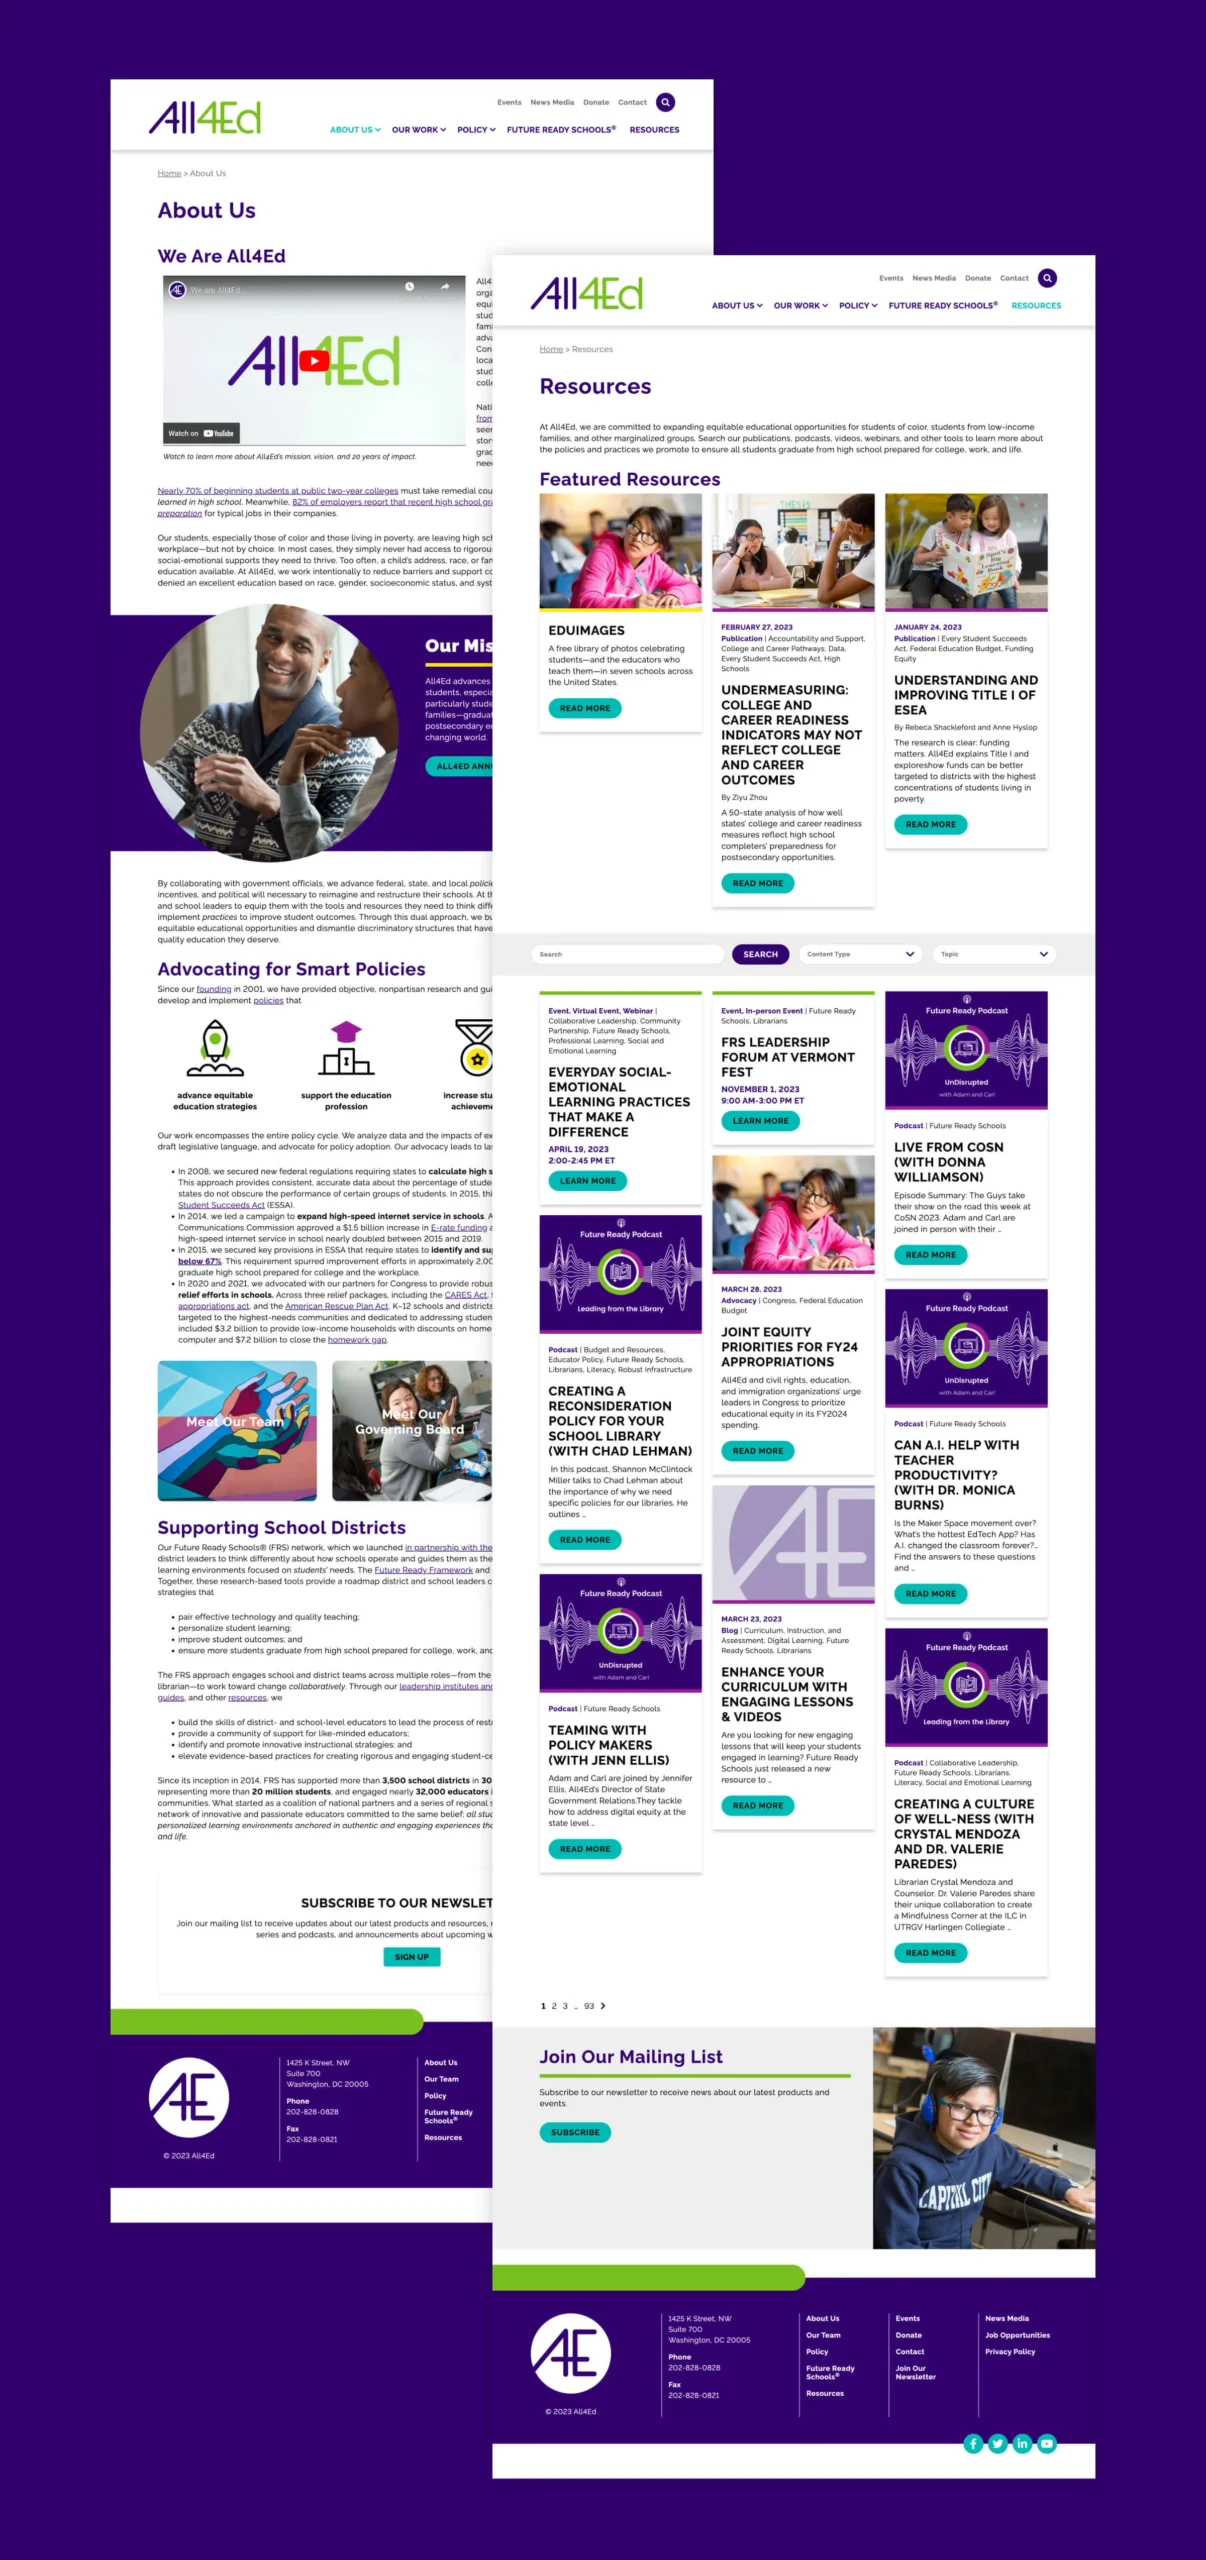 Sample pages from the All4Ed website shown overlapping, in desktop view